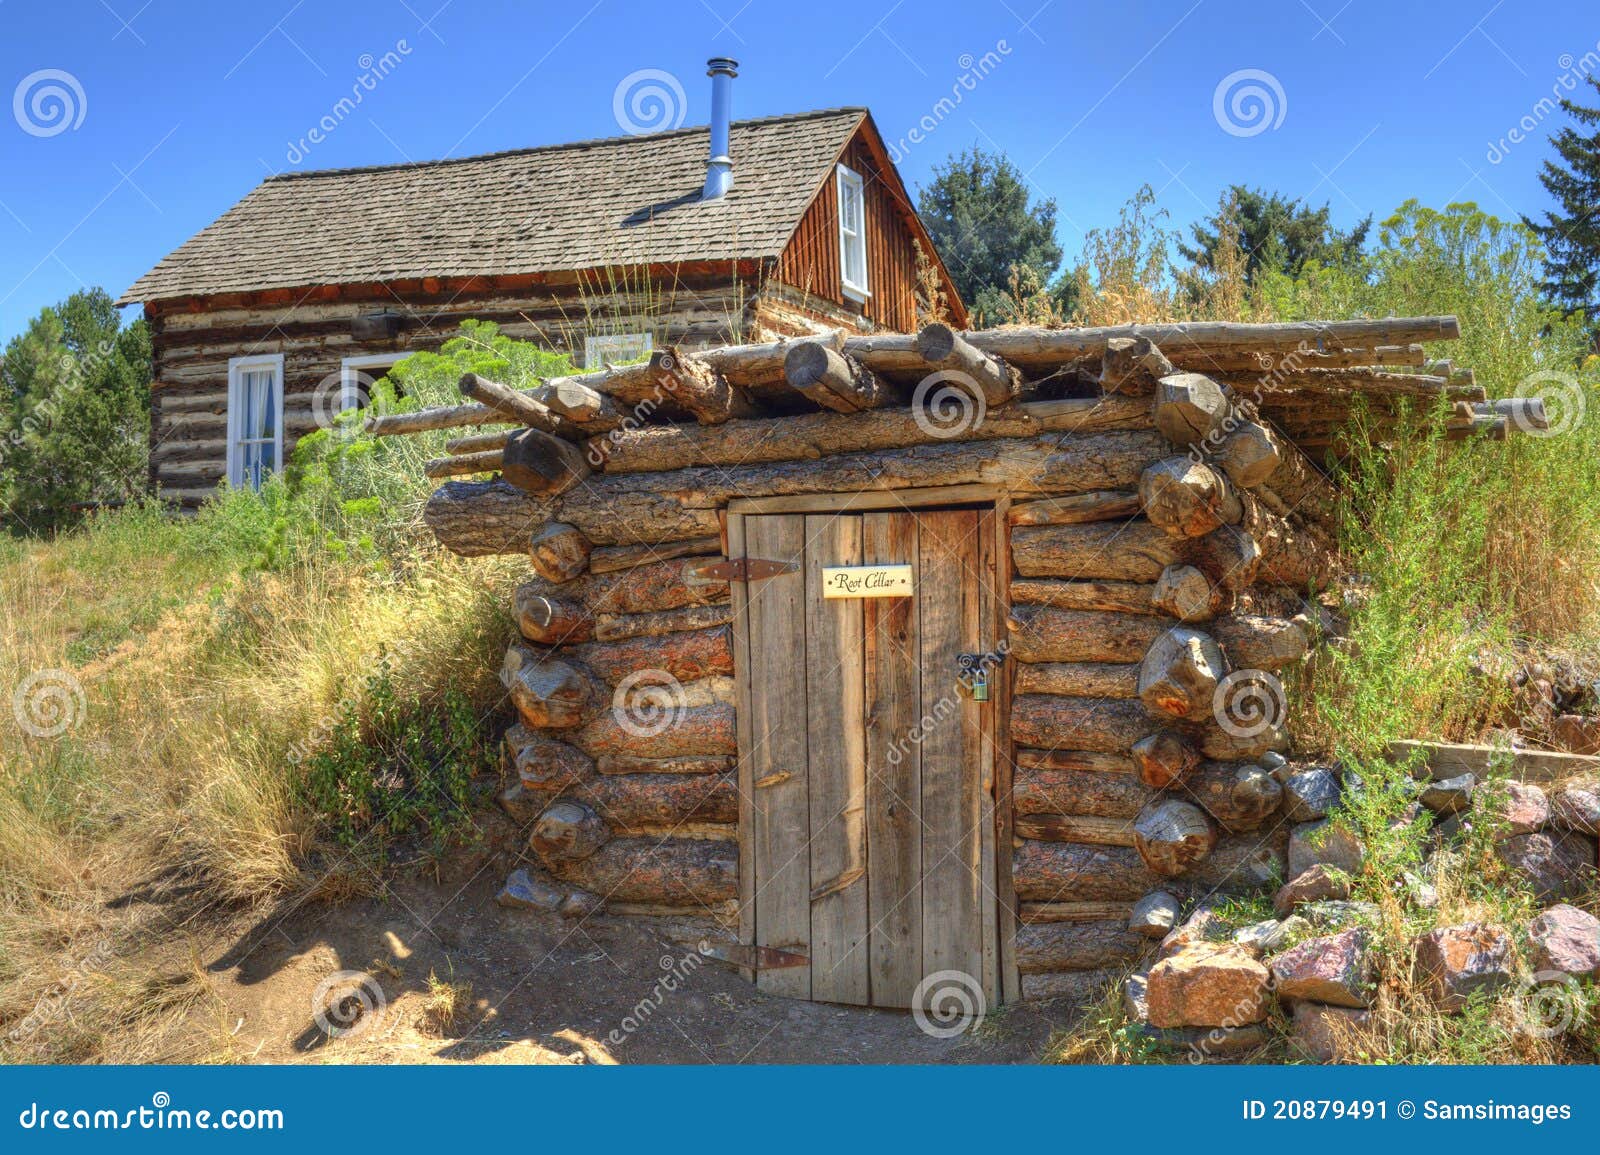 rustic old time log cabin and root cellar